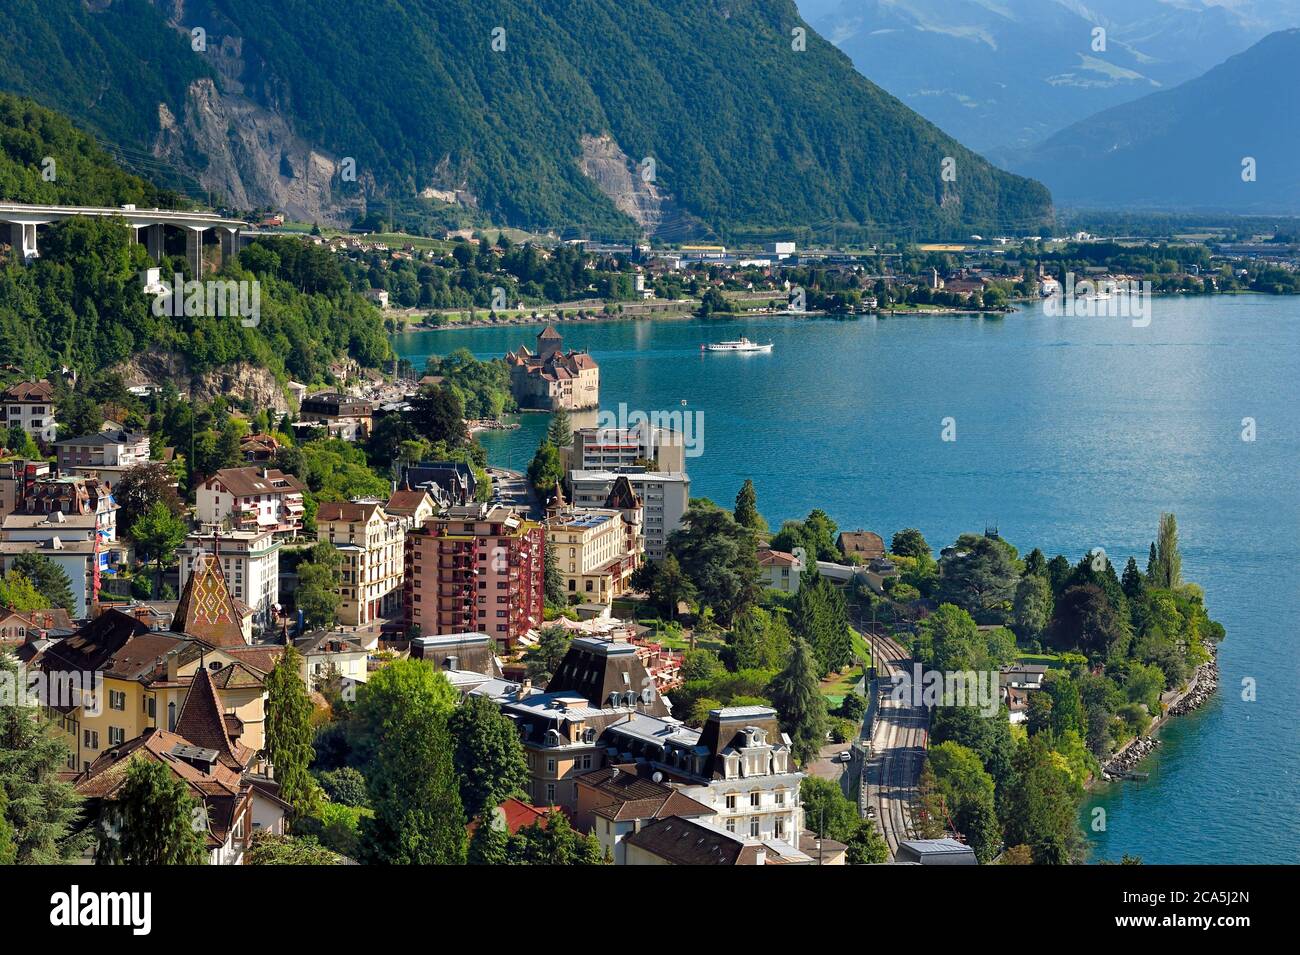 Switzerland, Canton of Vaud, Montreux in the foreground and the Chillon castle on the shores of Lake Geneva (Lac Leman) at Veytaux Stock Photo